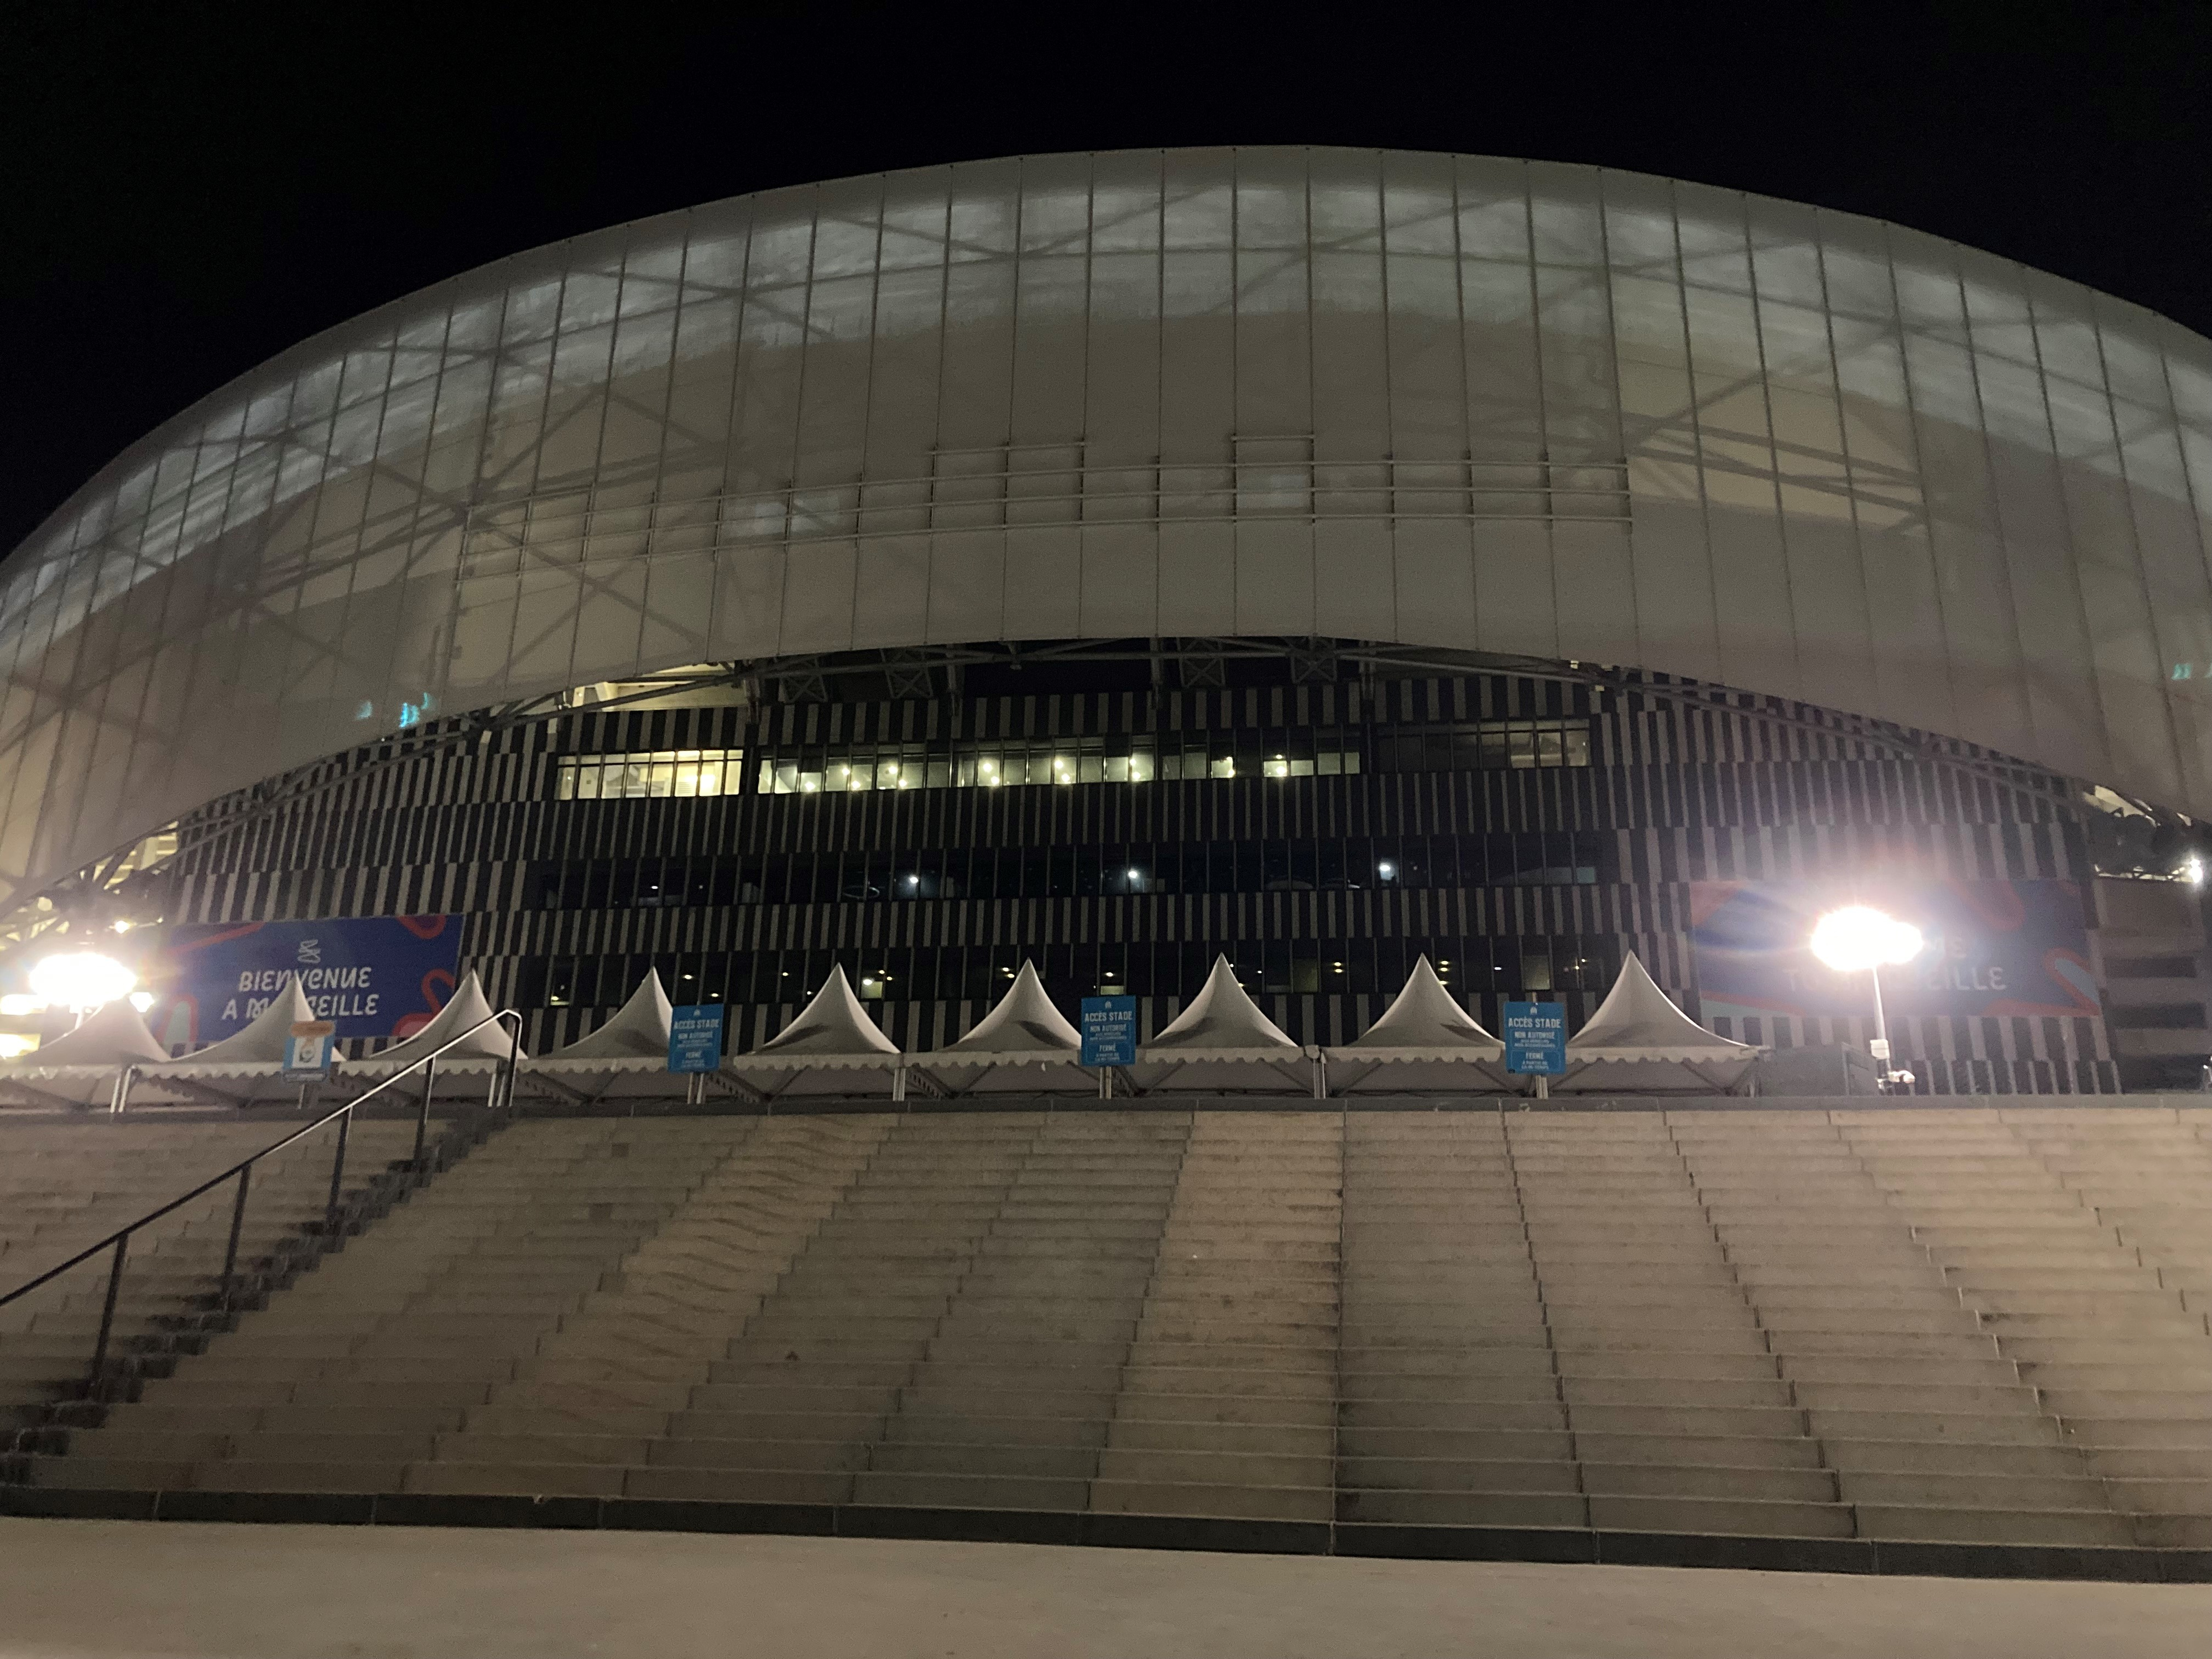 Direct from the Velodrome - Brian Owen's audio update ahead of Marseille v Brighton